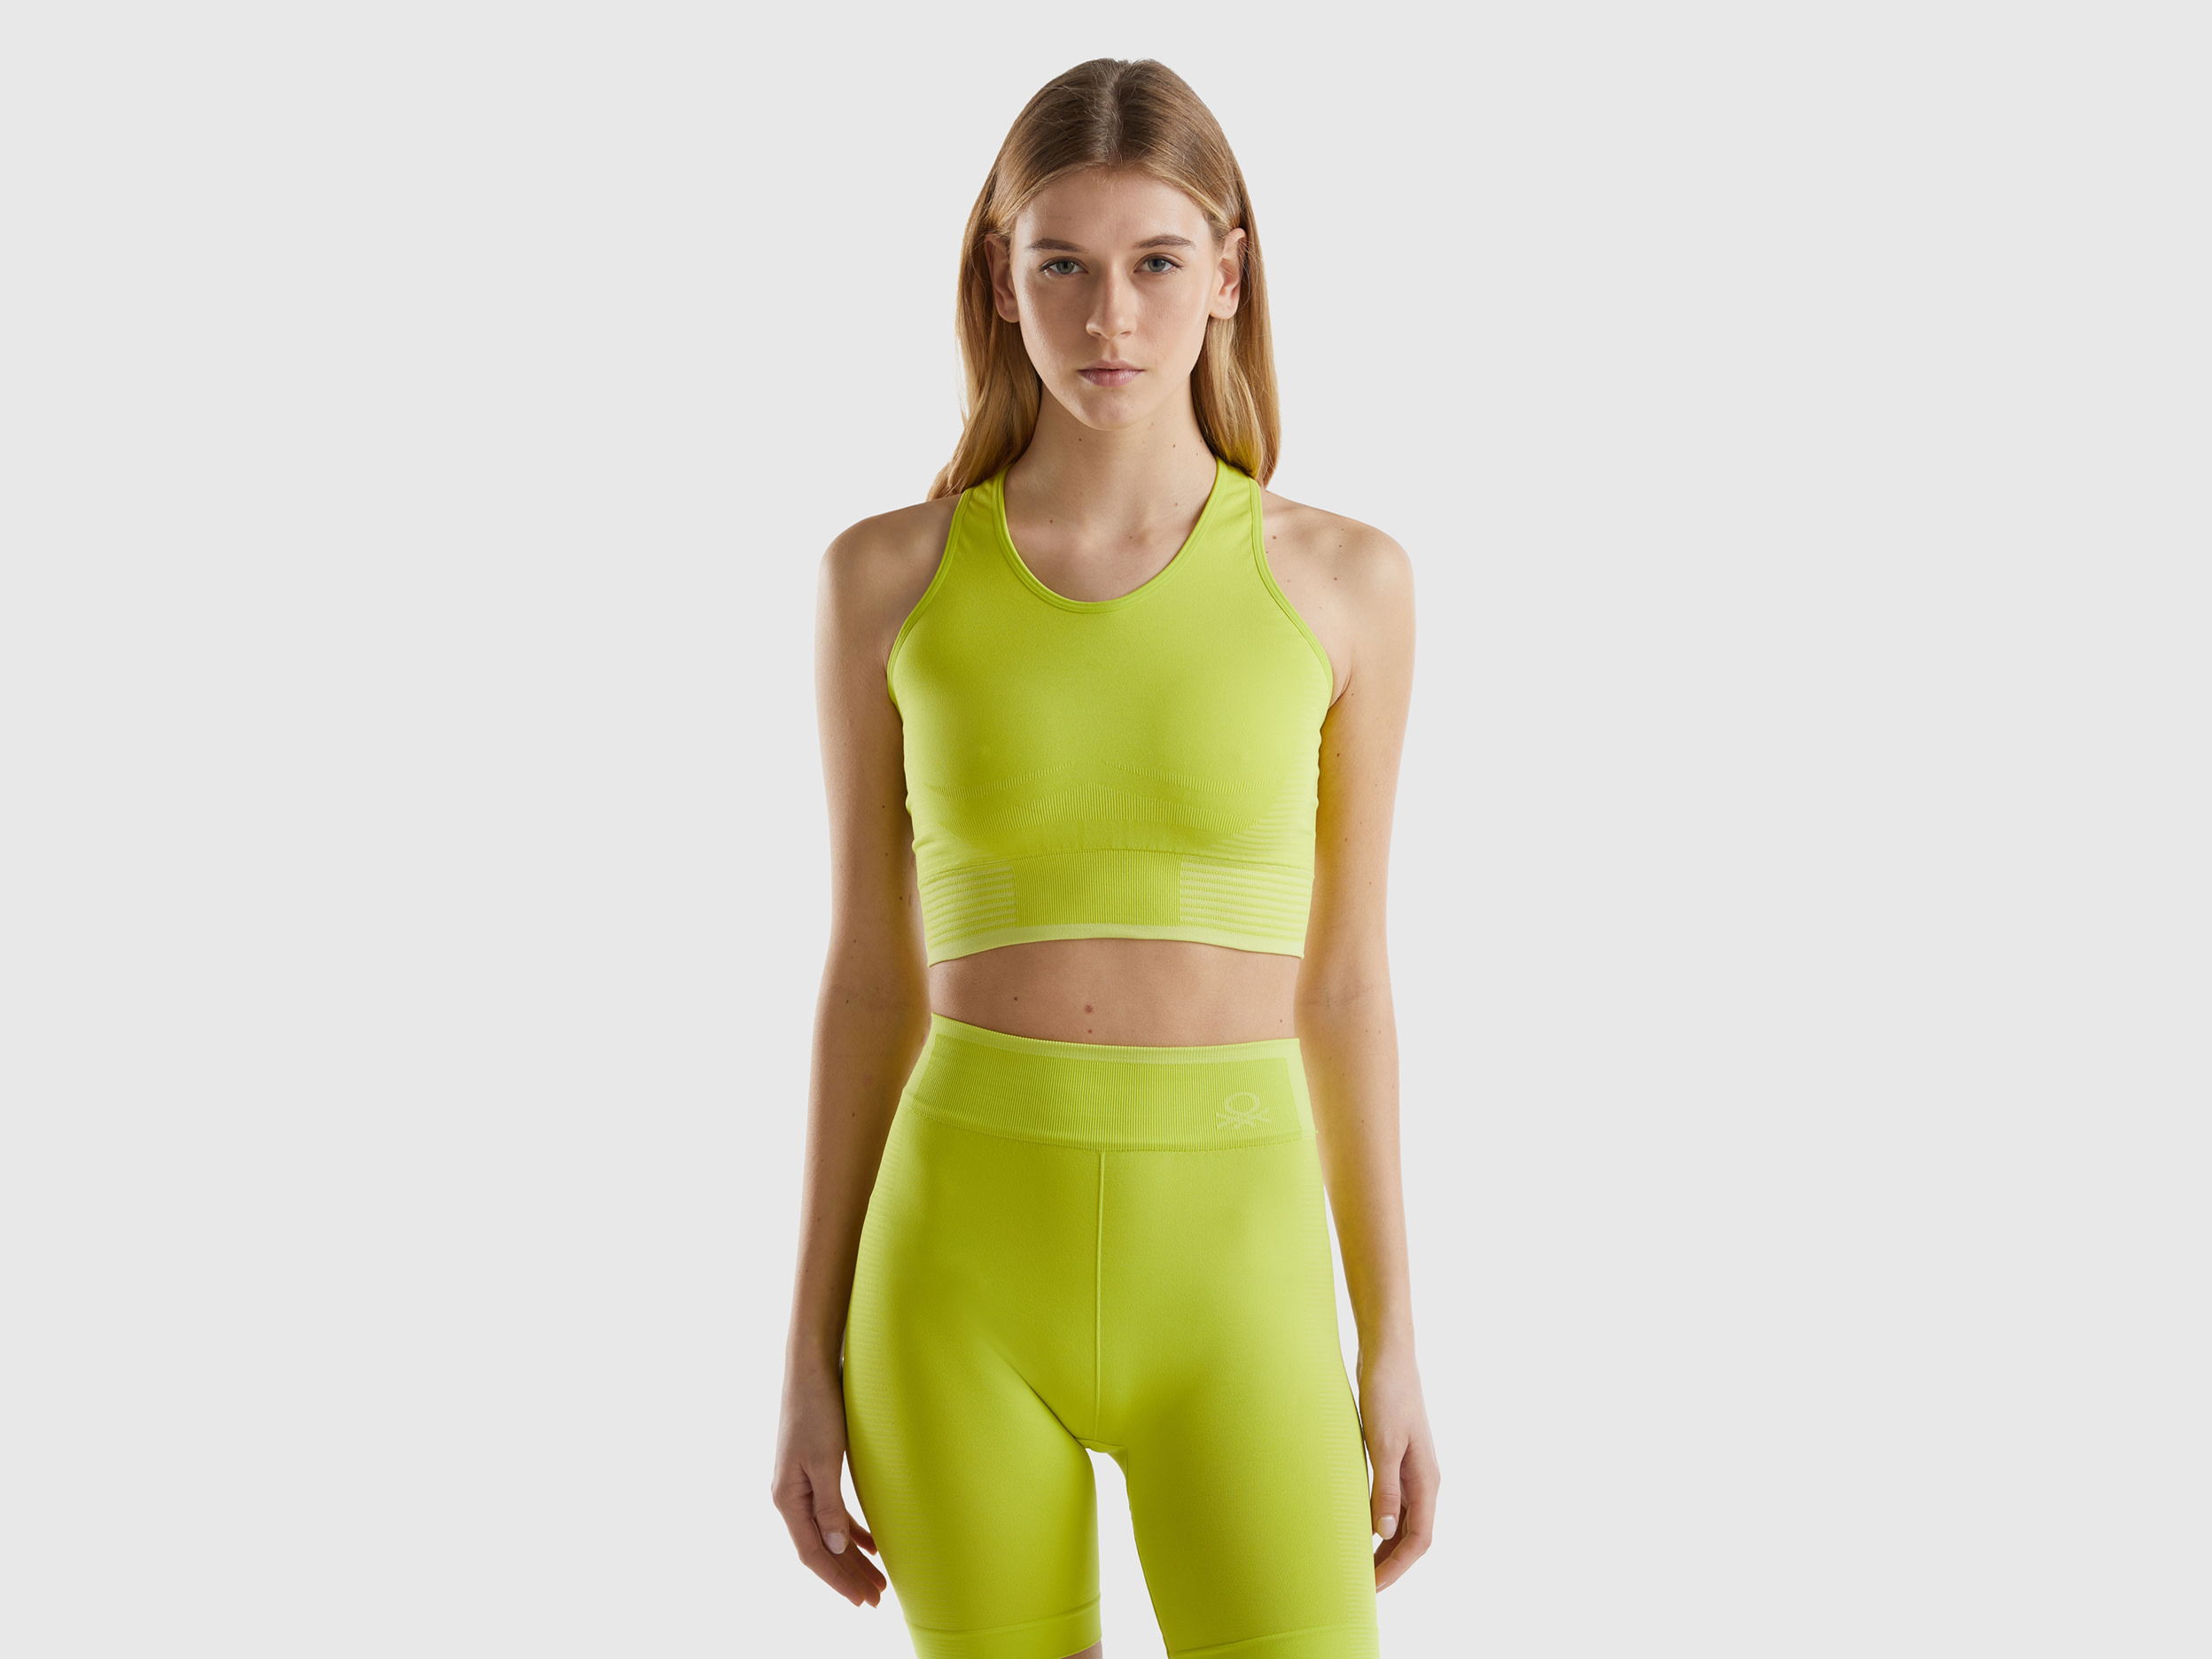 Image of Benetton, Seamless Sports Crop Top, size M, Lime, Women